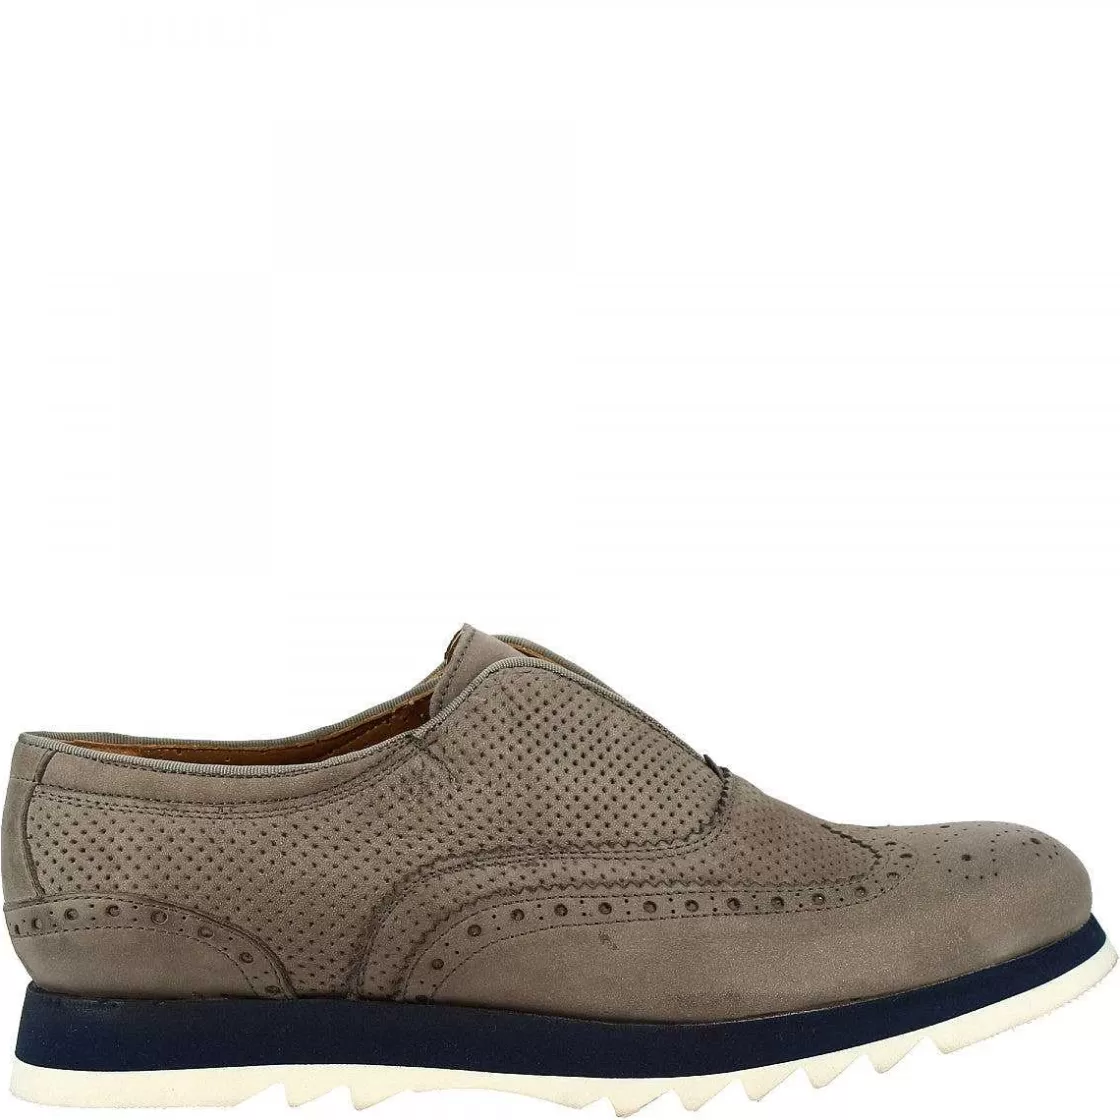 Leonardo Men'S Handmade Laceless Brogue Shoes In Taupe Perforated Suede Cheap